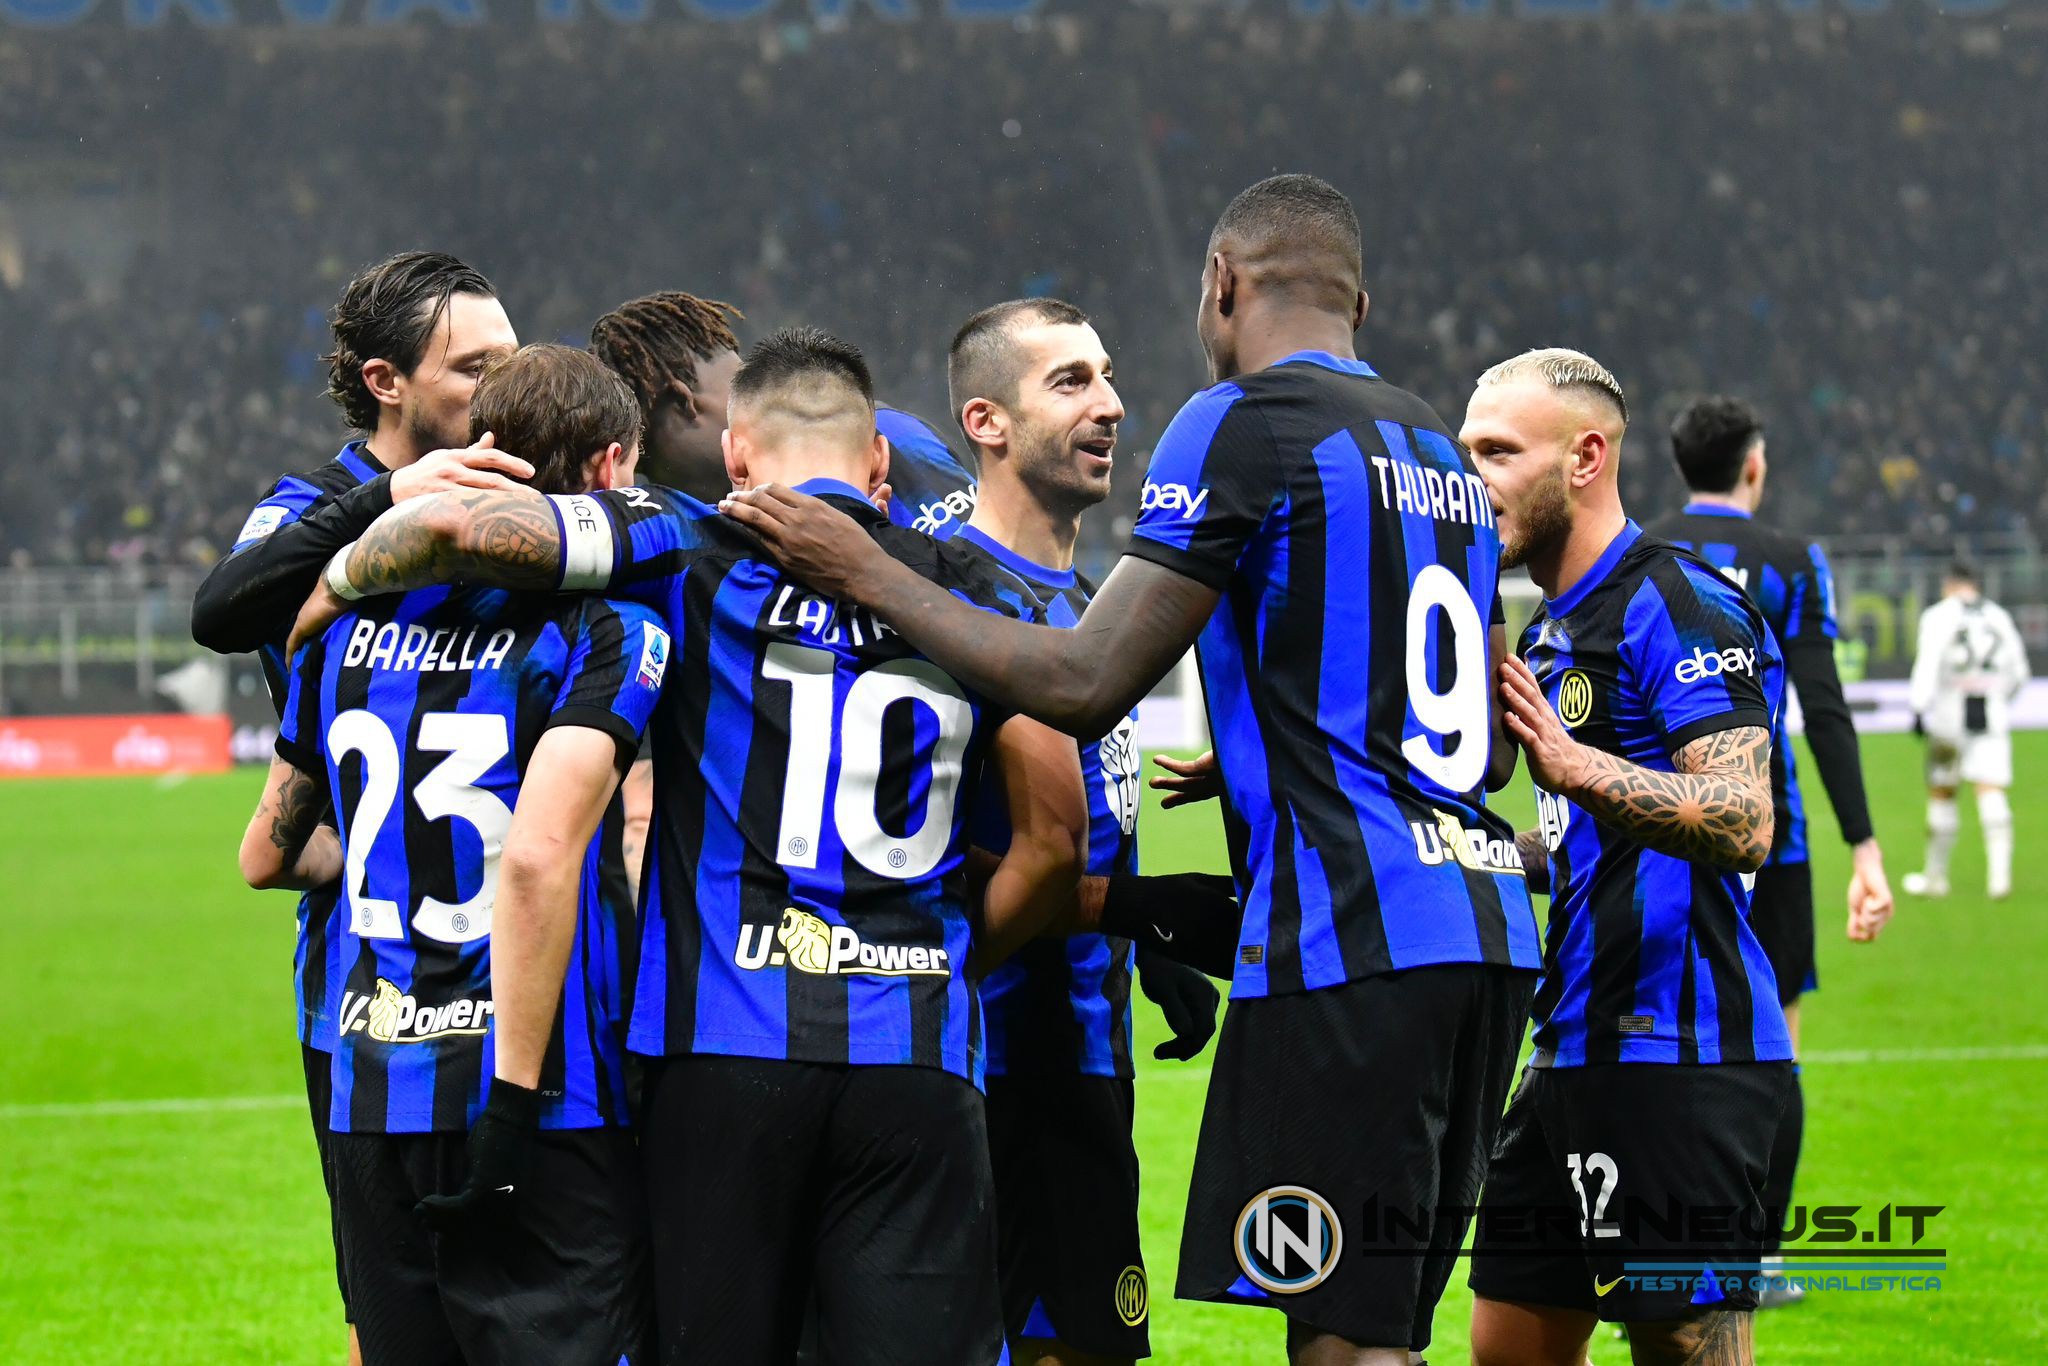 Esultanza Inter-Udinese (Photo by Tommaso Fimiano/Inter-News.it ©)